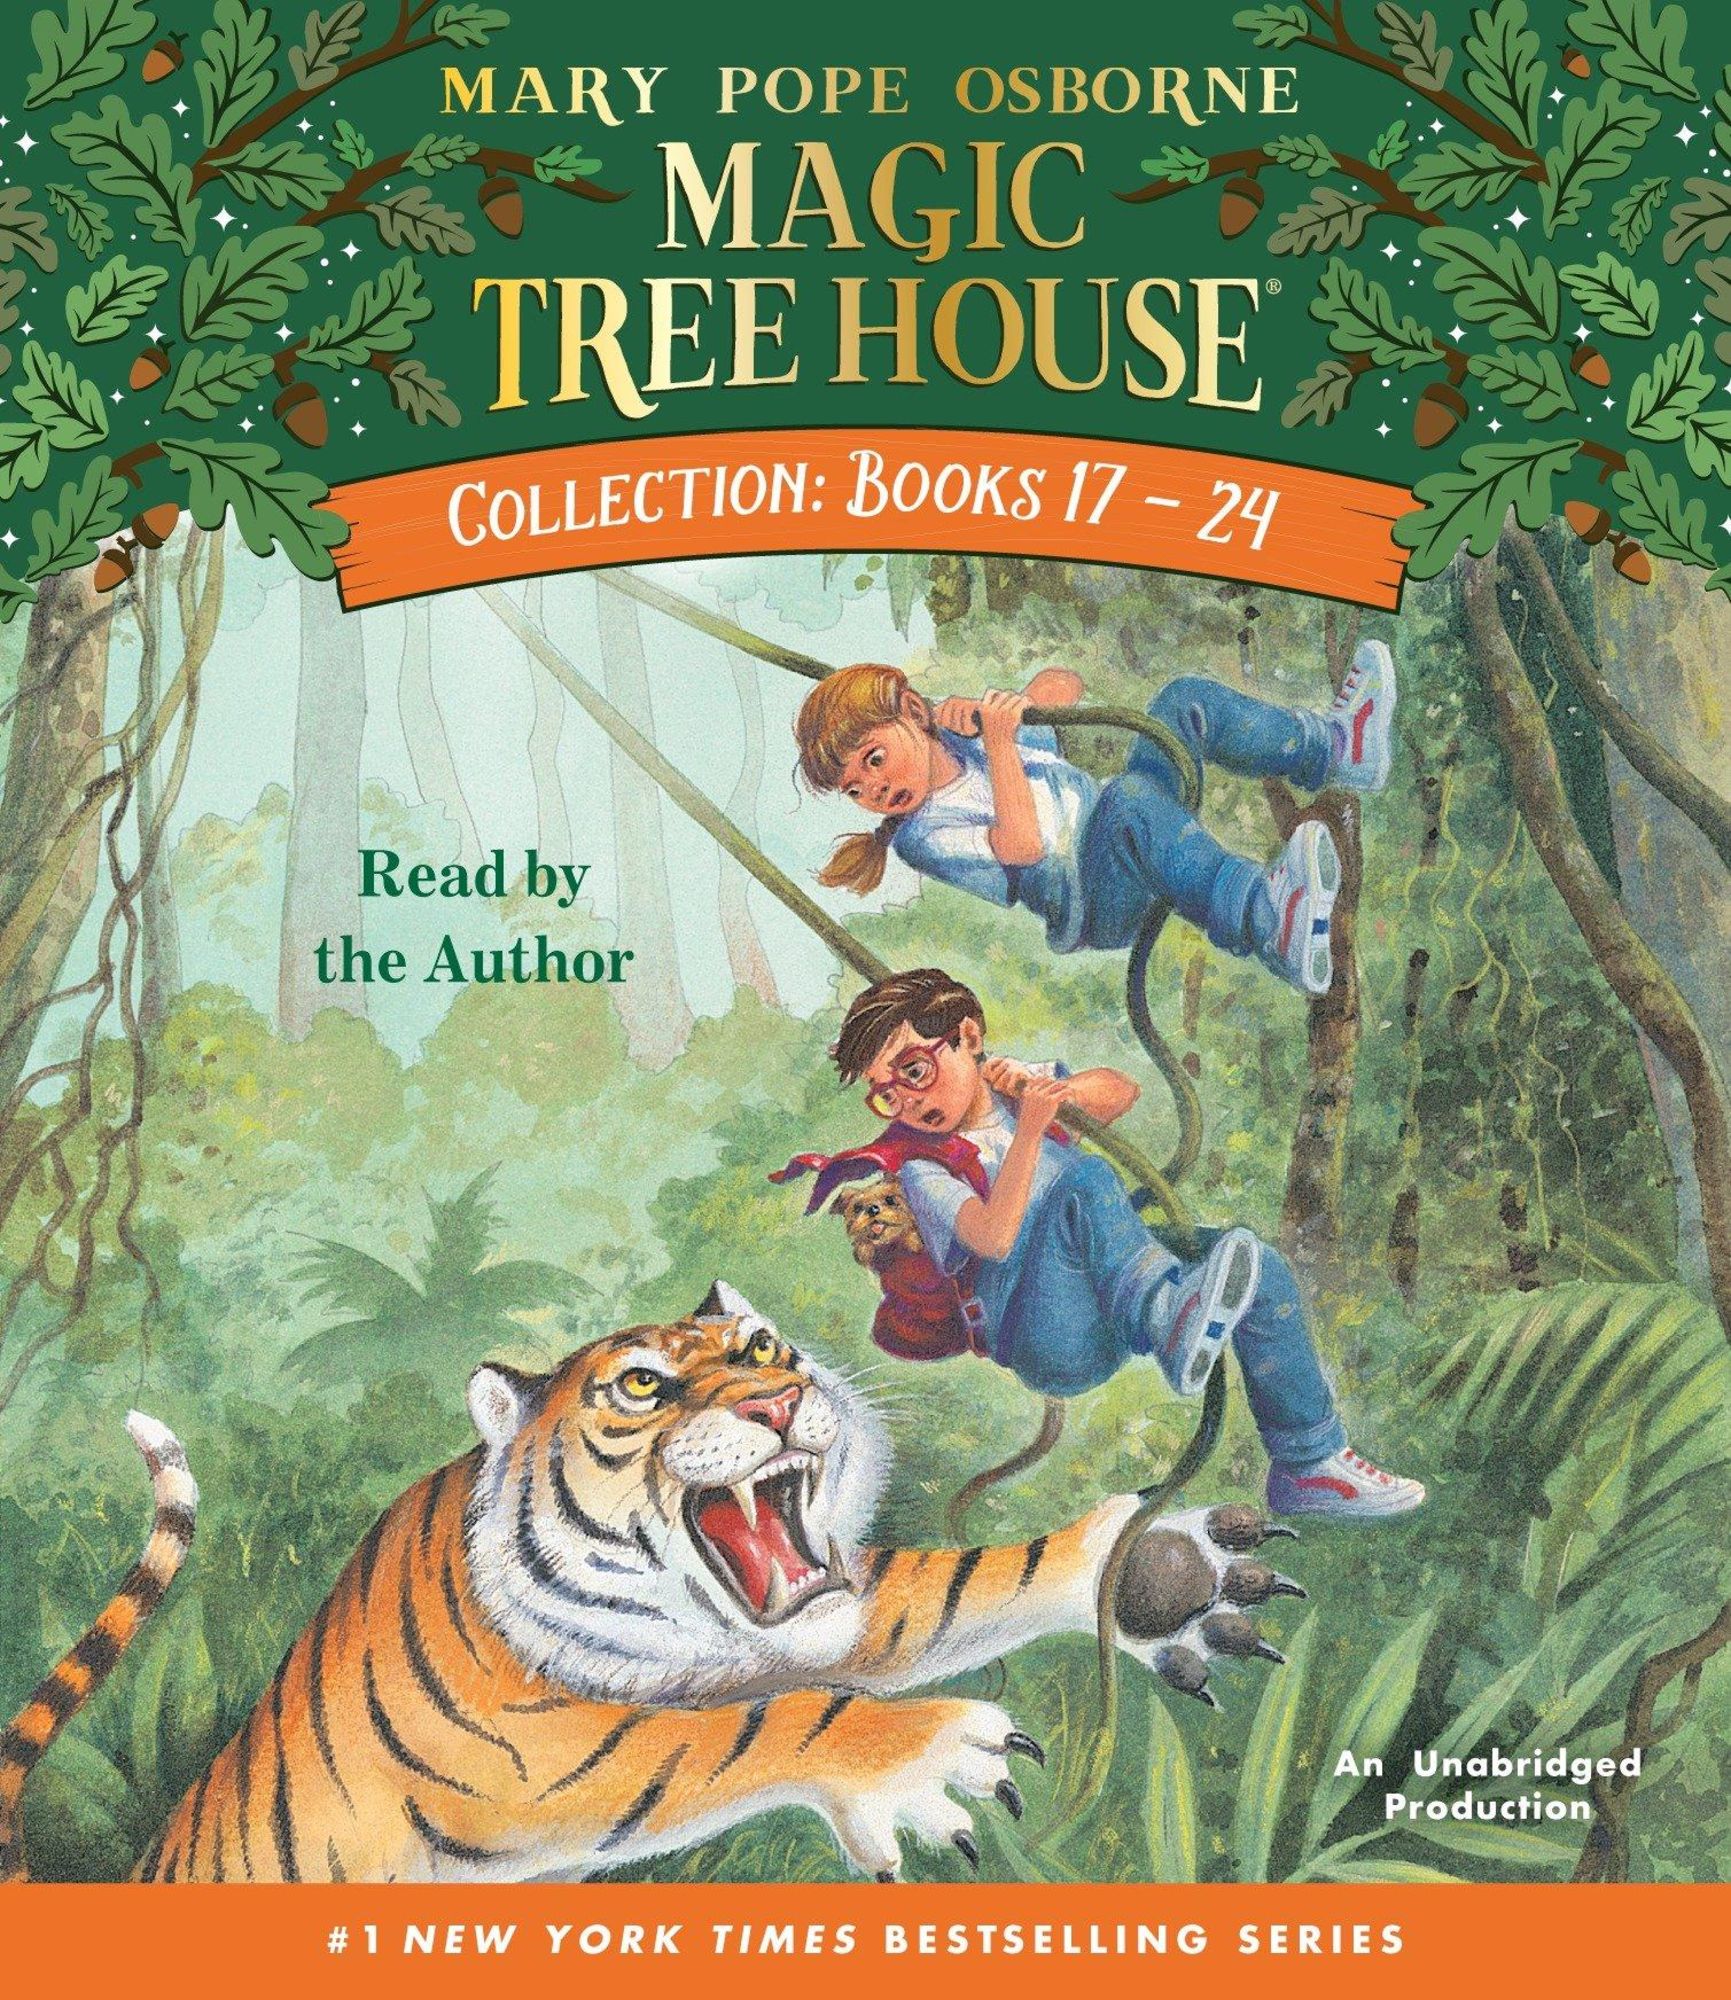 House　Collection:　Tree　Magic　Books　Osborne'　'Mary　17-24'　Pope　von　Hörbuch